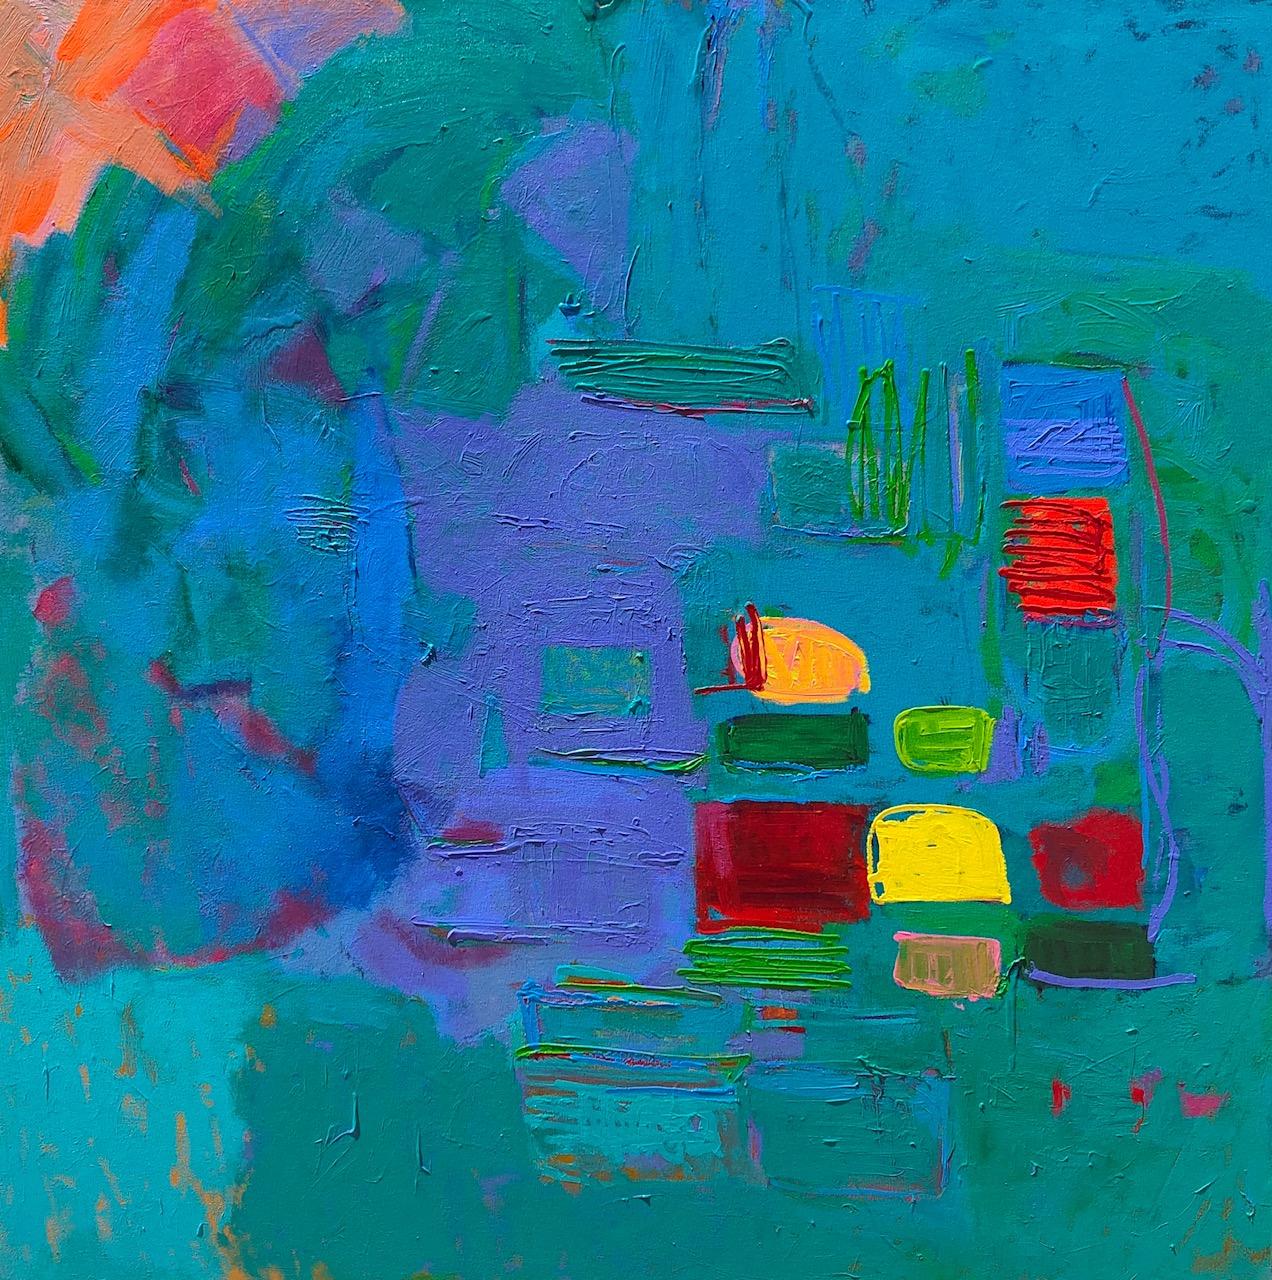 John Blee Abstract Painting - "Vergier D'Aix" Large square abstract aqua painting with lush brushstrokes